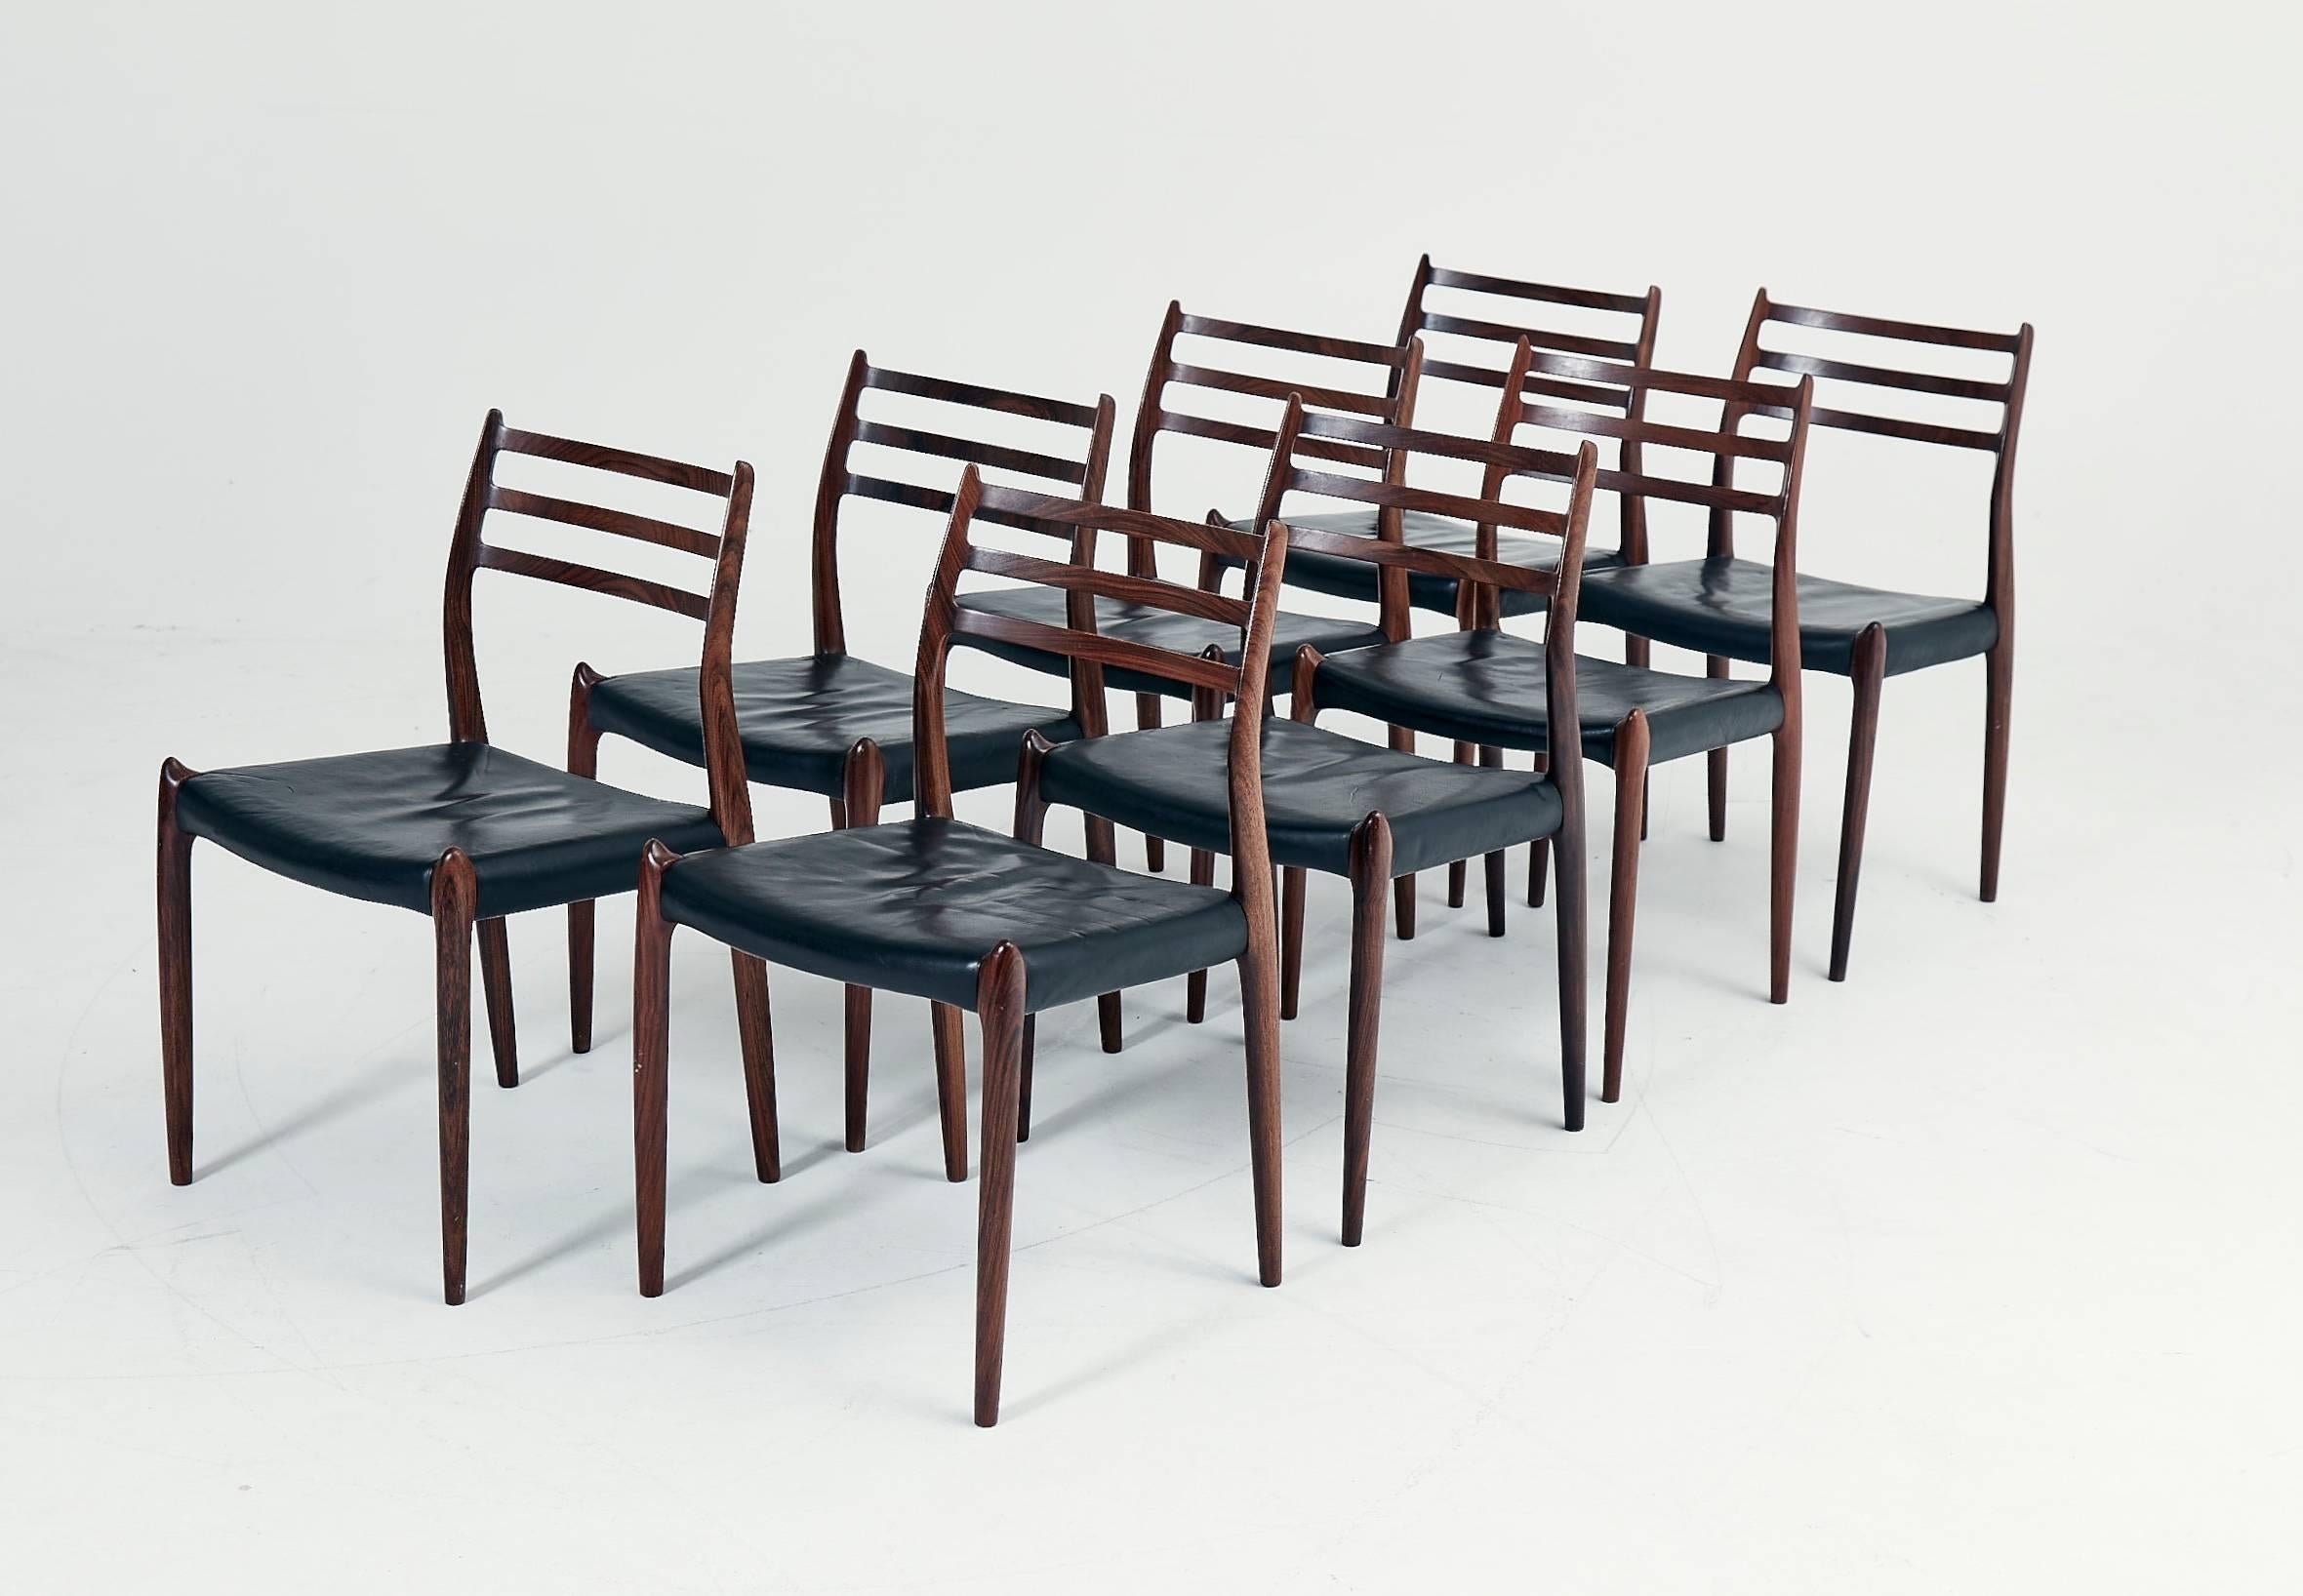 A set of eight rosewood N.O. Møller 78 side chairs. 1962 for J.L. Møllers Møbelfabrik, Denmark. Rosewood, original black leather seat covers. Excellent condition. Ships worldwide. More photos on request.